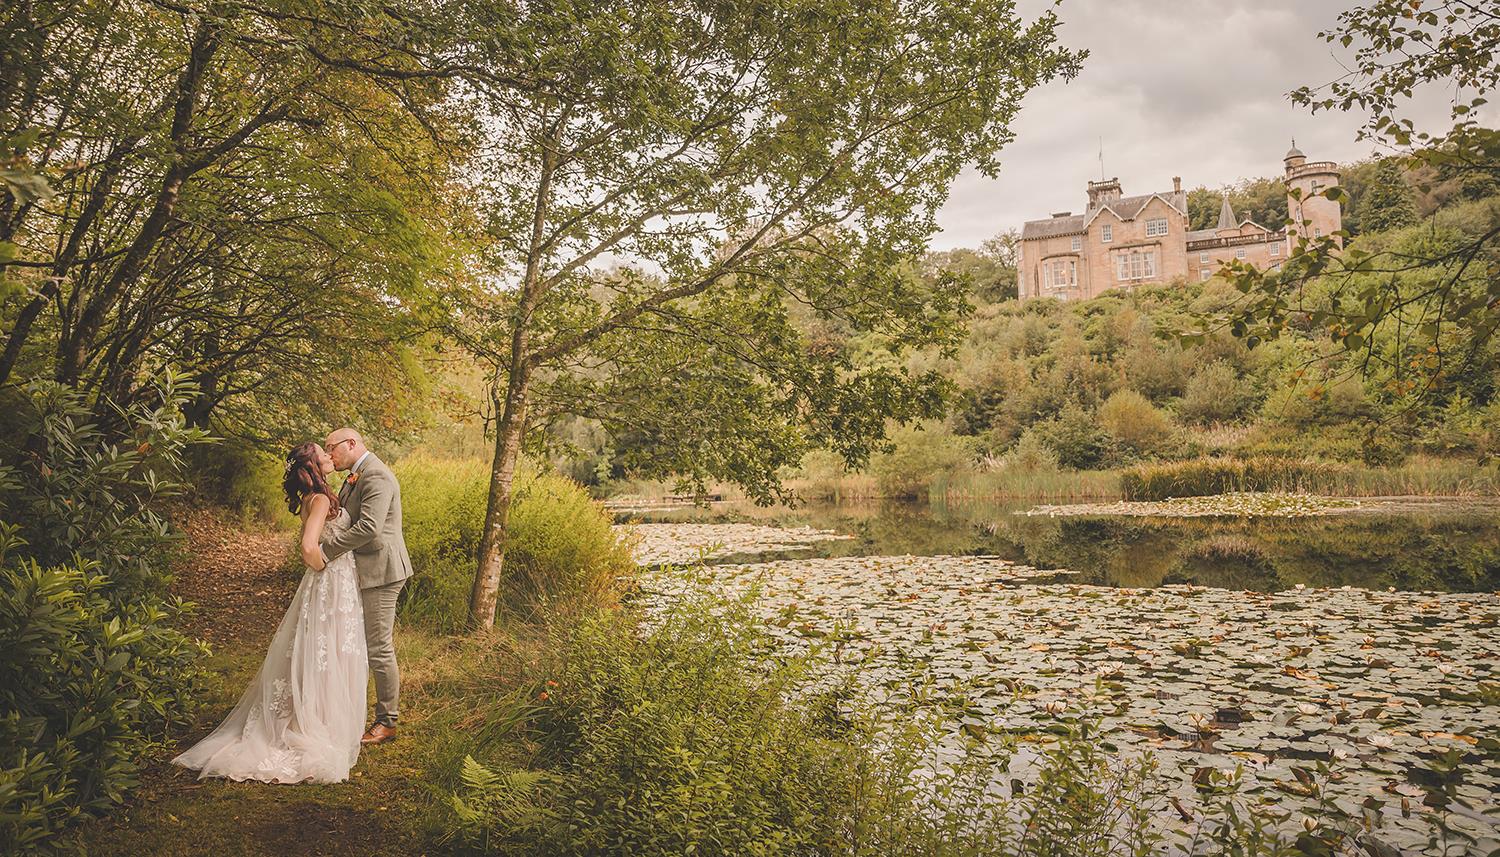 Couple with venue in background. Photo Credit: Duncan Ireland Photography